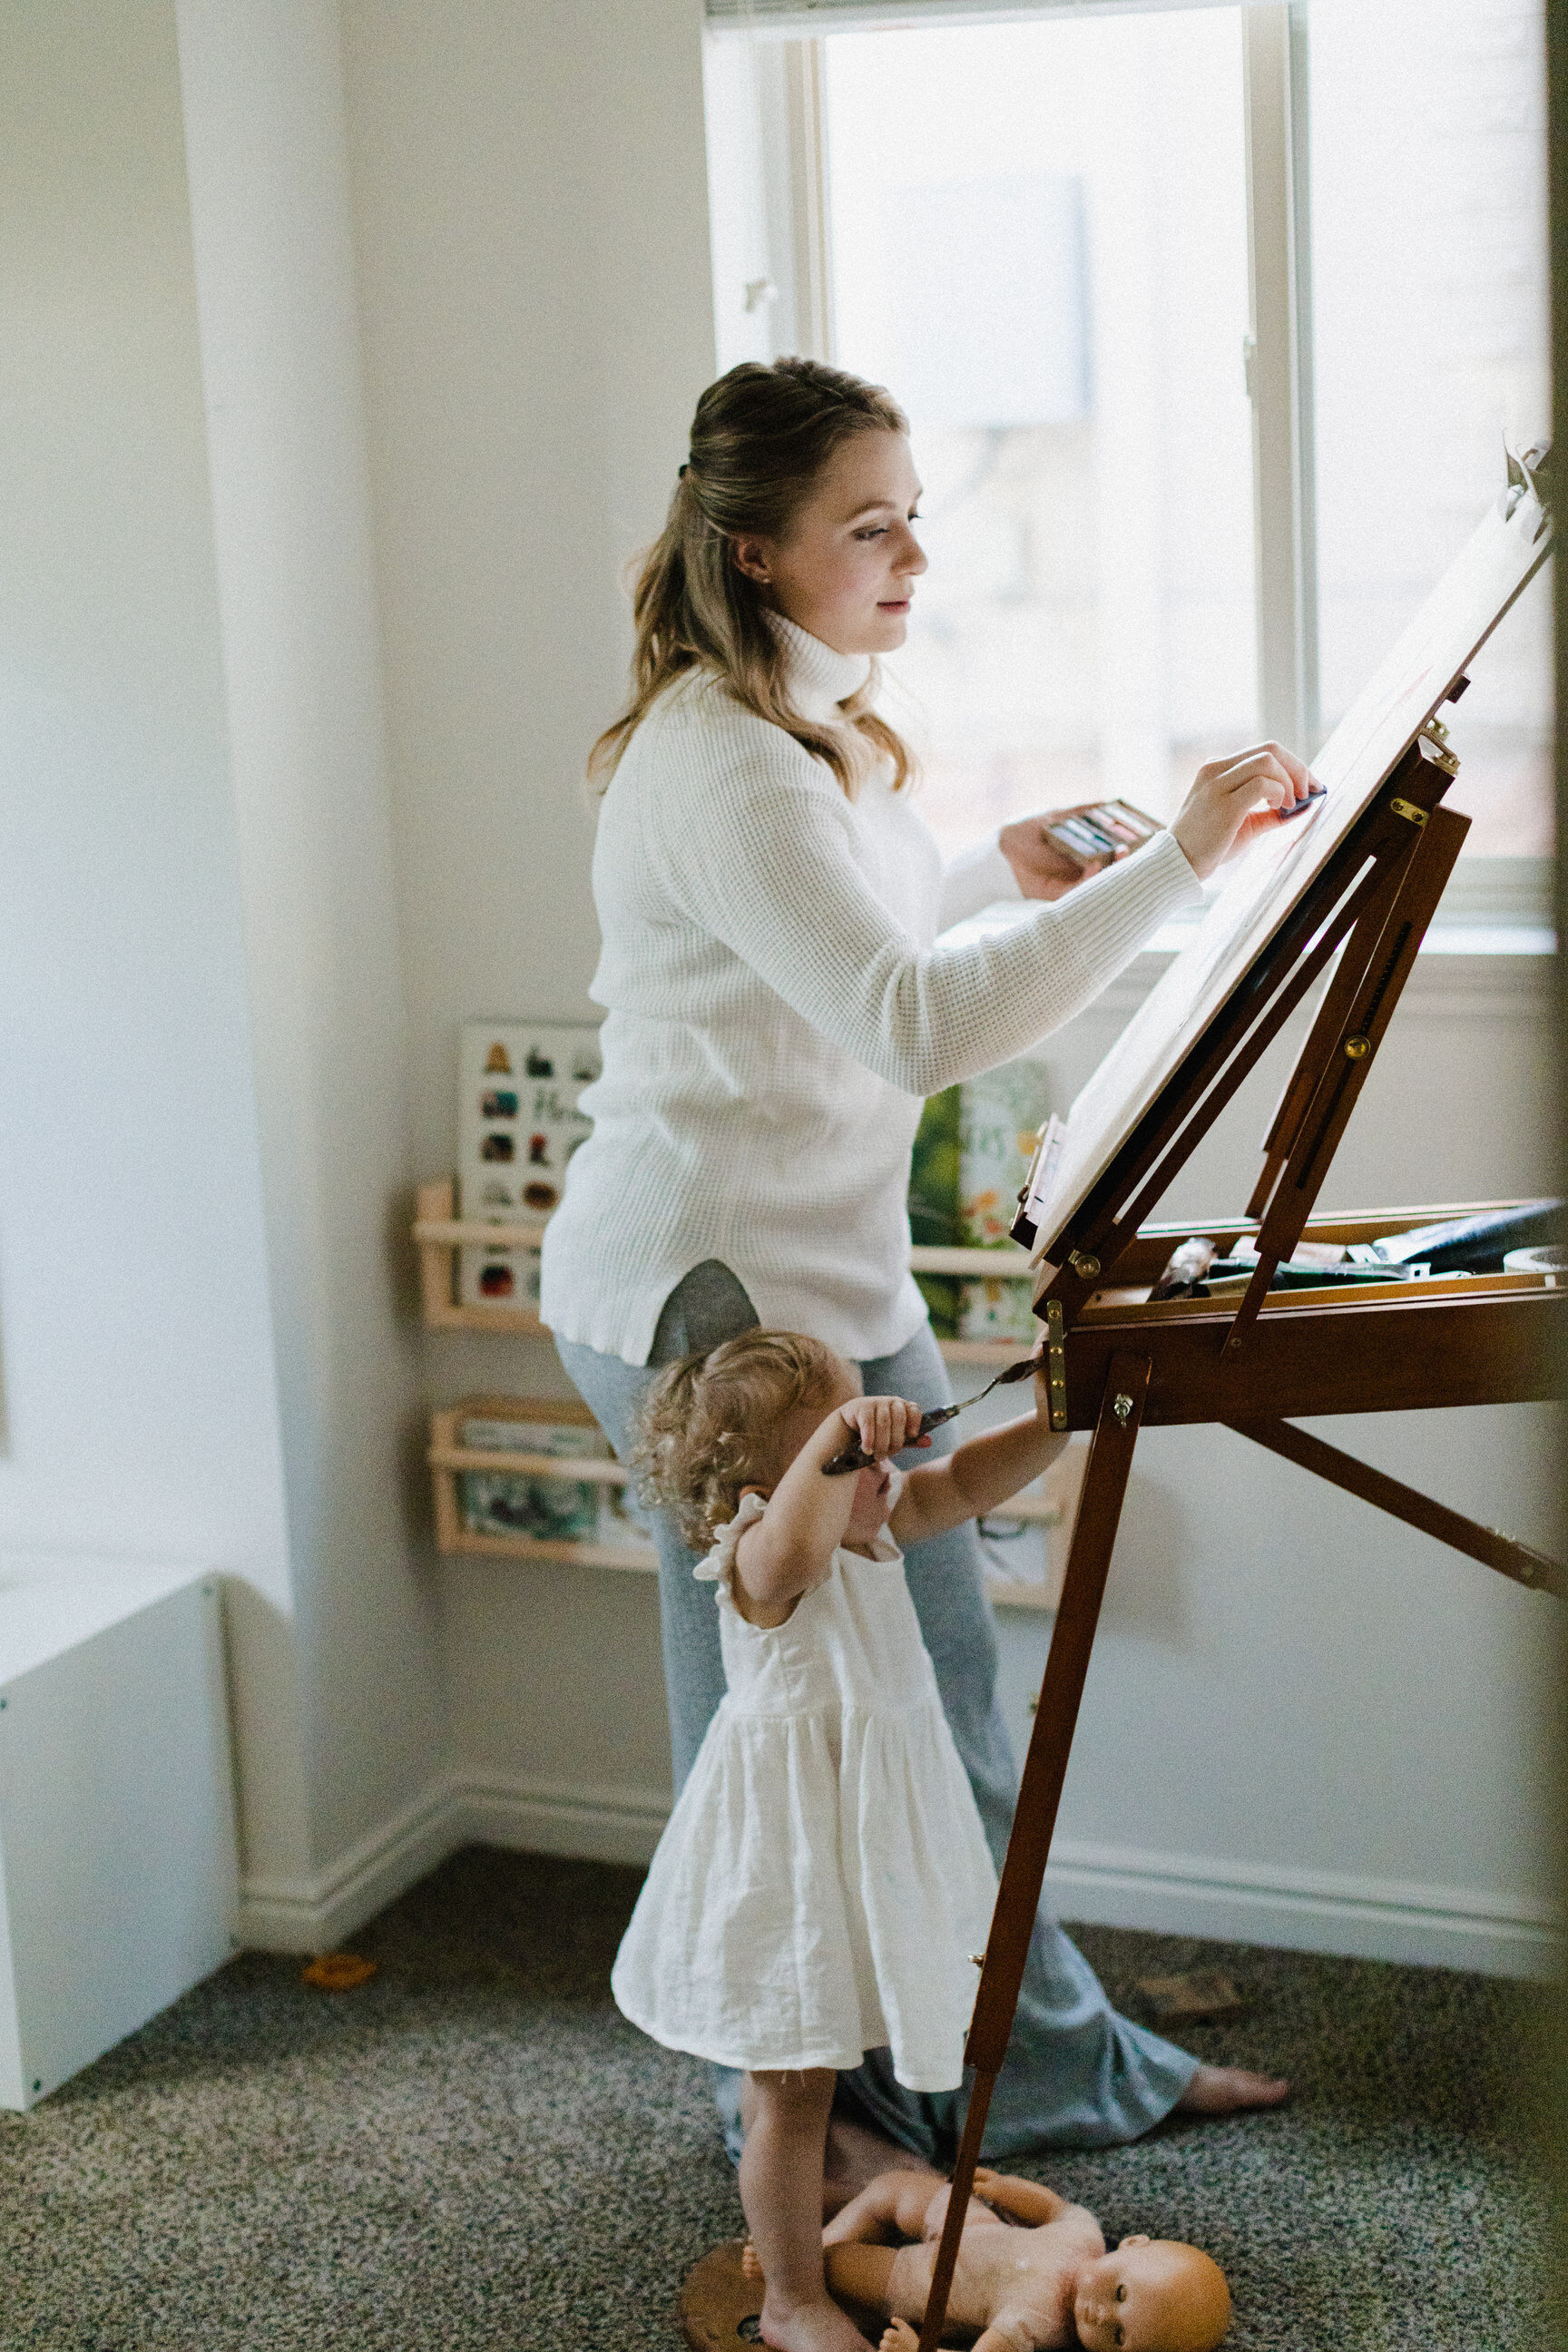 mom painting at easel while daughter watches